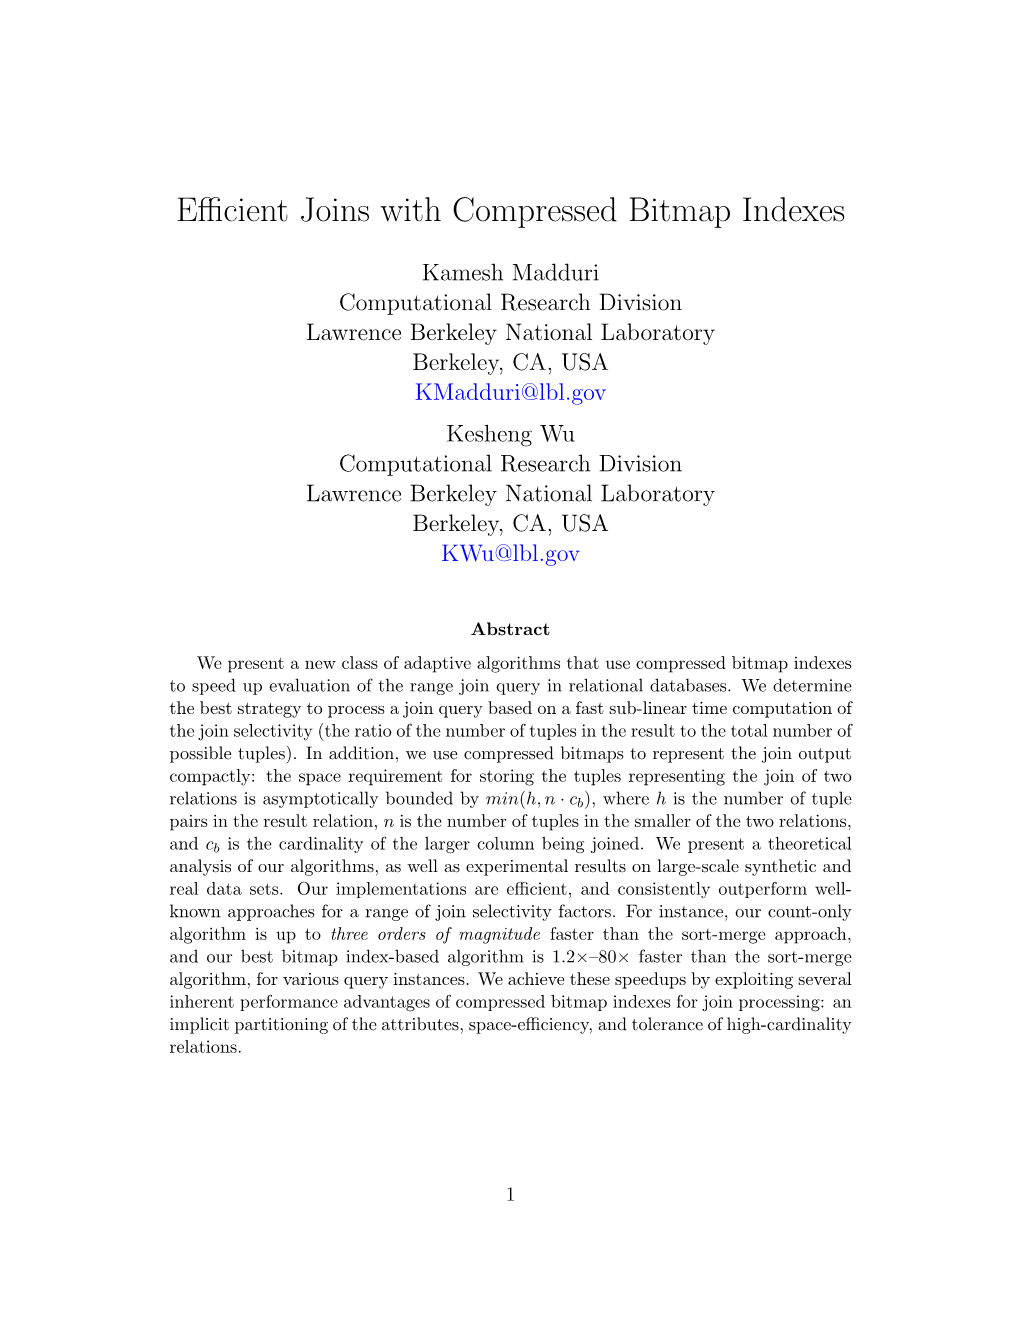 Efficient Joins with Compressed Bitmap Indexes